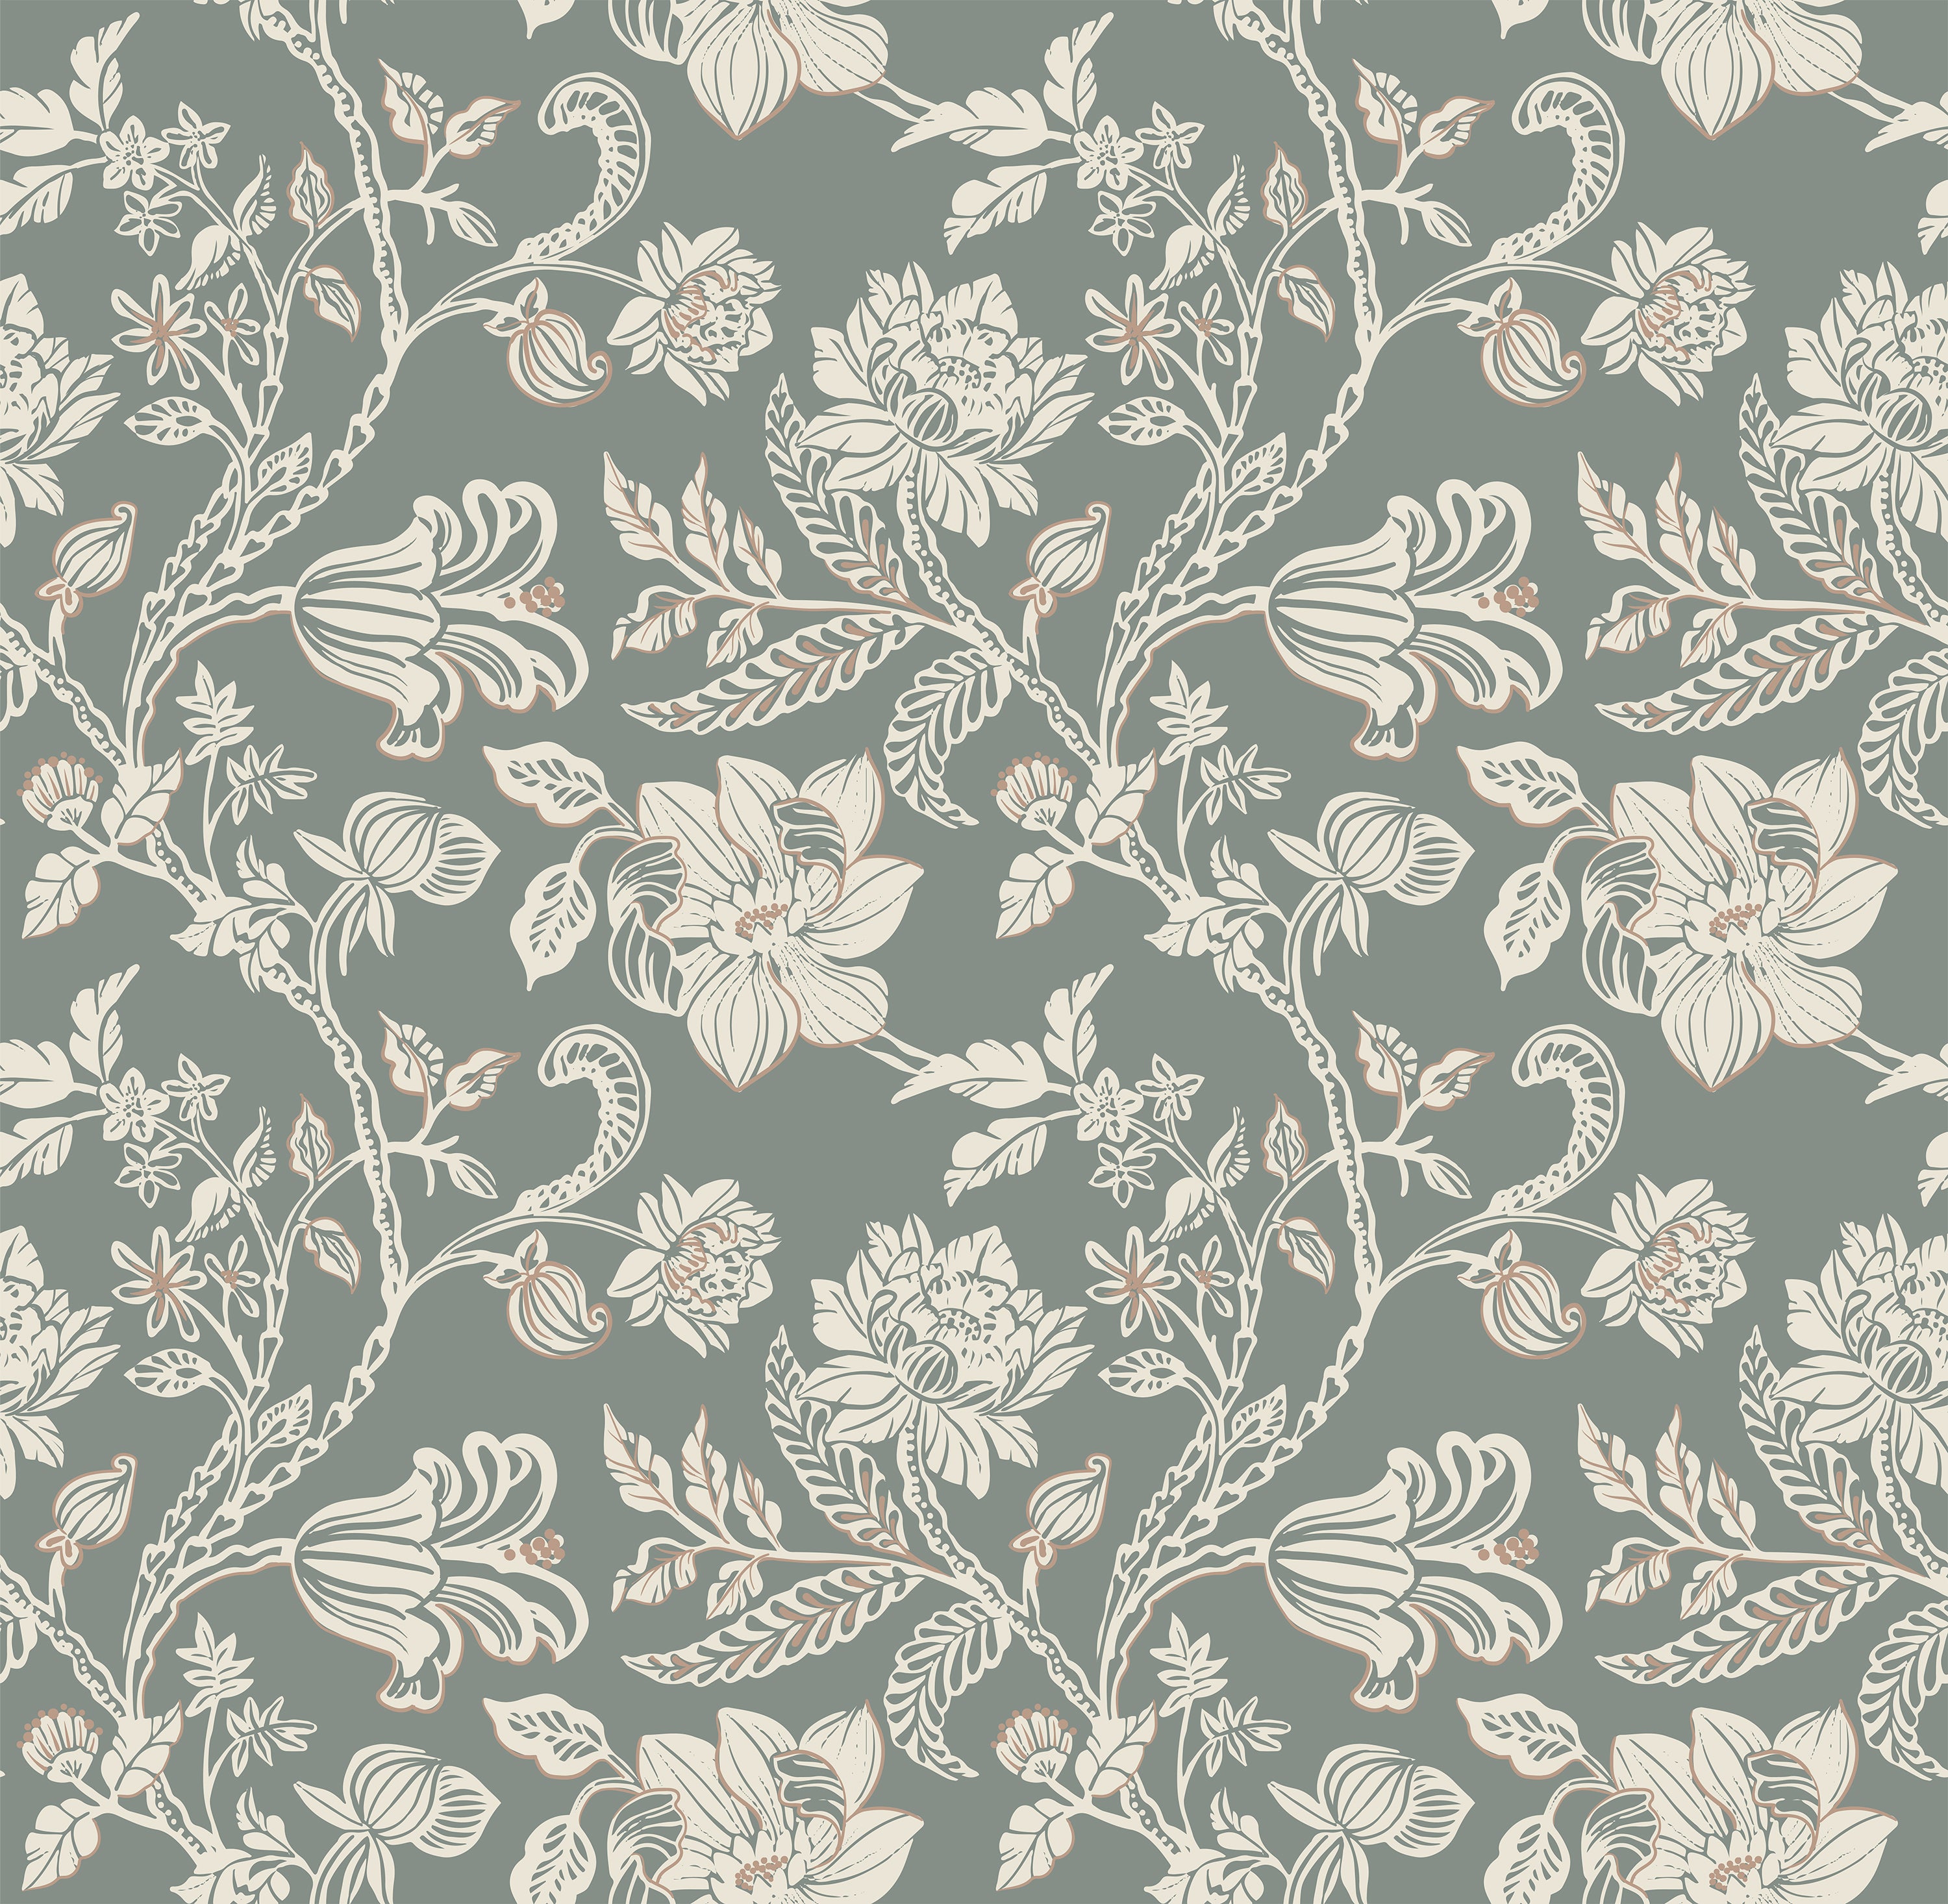 A close-up view of the Ornate Trellis Wallpaper displaying an intricate design with detailed flowers and foliage intertwined in a trellis pattern, set against a rich teal background. The pattern features subtle white and grey tones, adding depth and elegance.